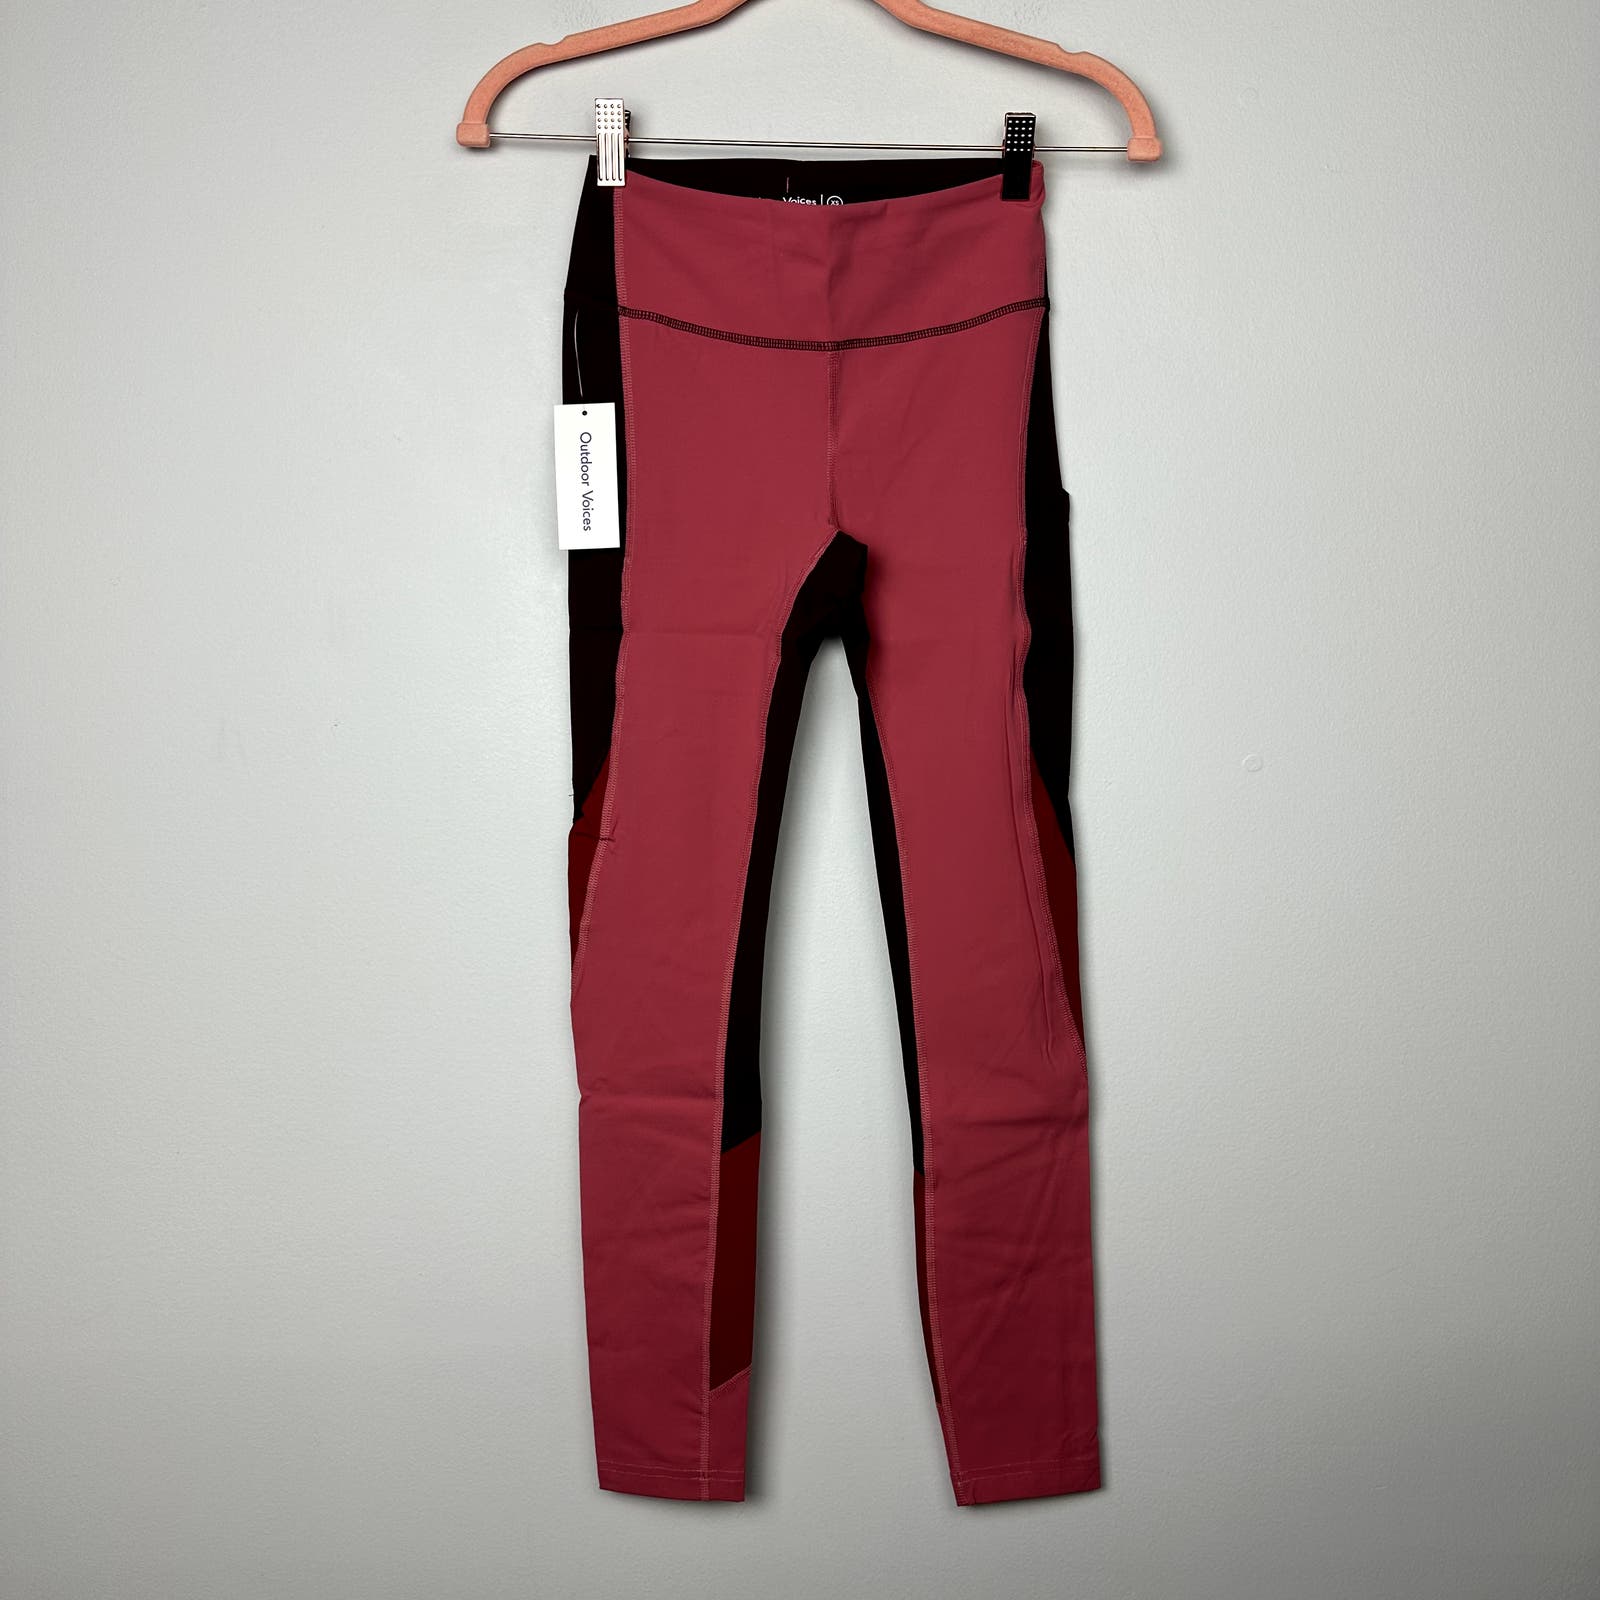 Outdoor Voices NWT Rose Pomegranate SuperForm™ 7/8 Legging Size XS